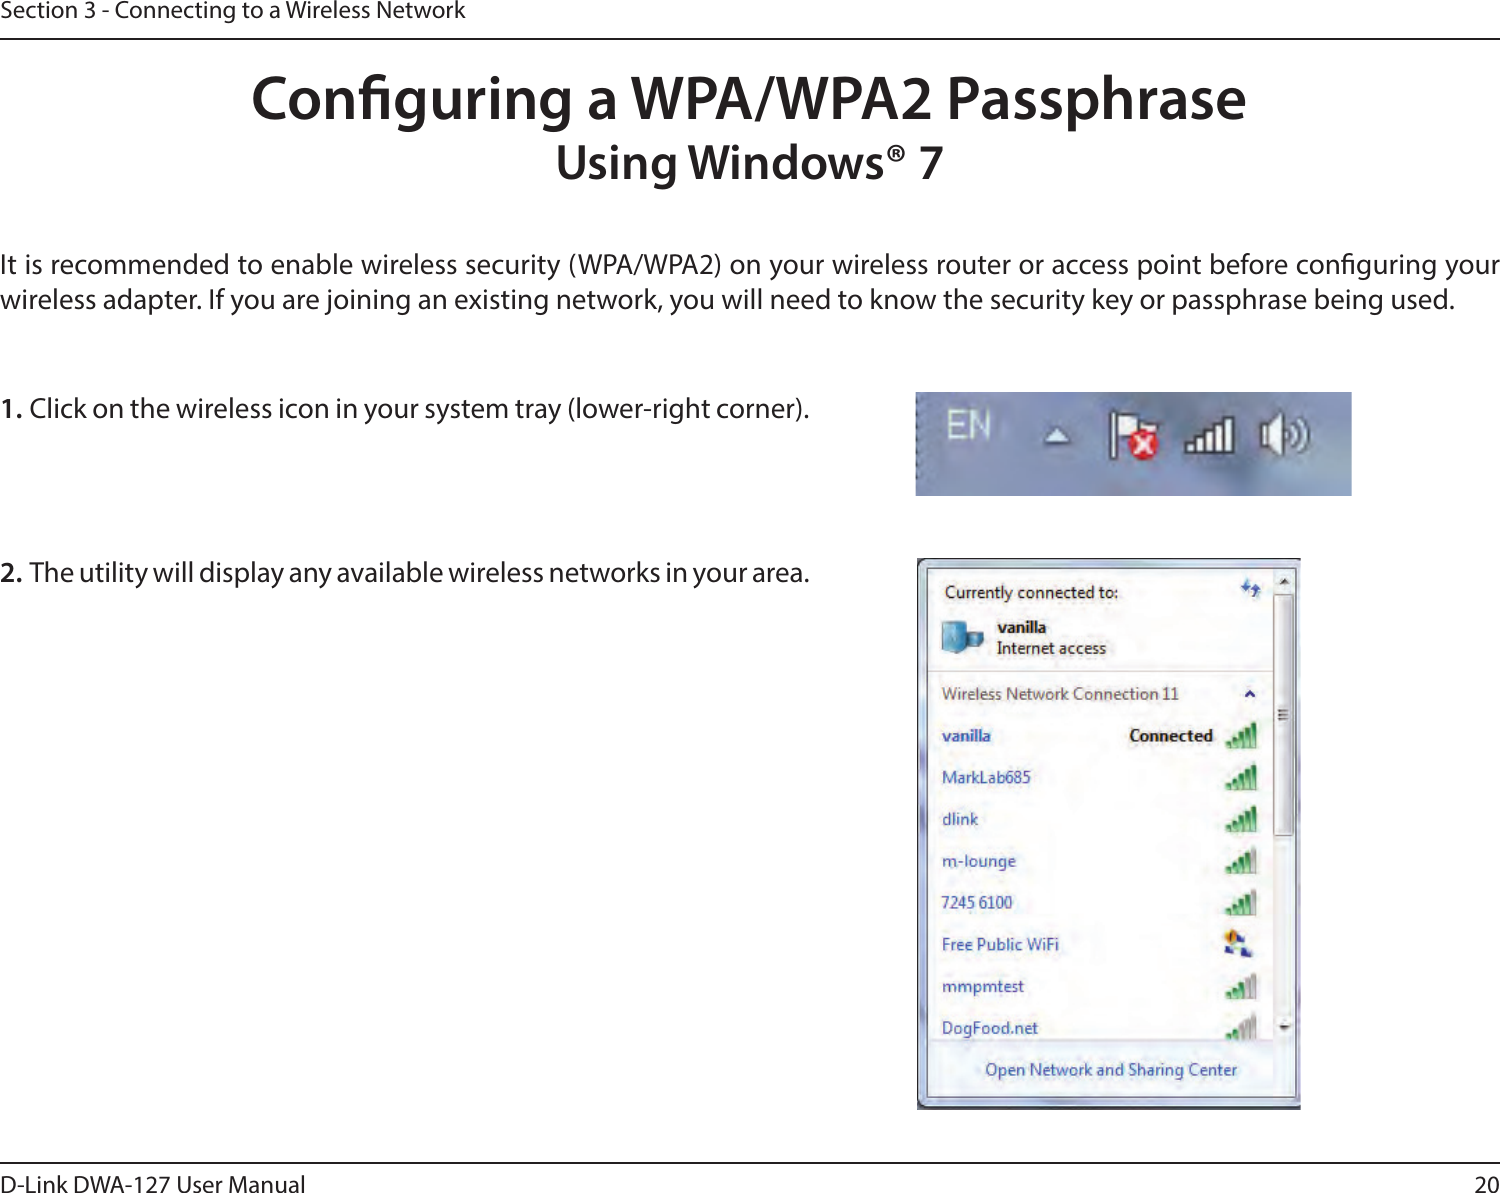 20D-Link DWA-127 User ManualSection 3 - Connecting to a Wireless NetworkConguring a WPA/WPA2 PassphraseUsing Windows® 7It is recommended to enable wireless security (WPA/WPA2) on your wireless router or access point before conguring your wireless adapter. If you are joining an existing network, you will need to know the security key or passphrase being used.2. The utility will display any available wireless networks in your area.1. Click on the wireless icon in your system tray (lower-right corner).